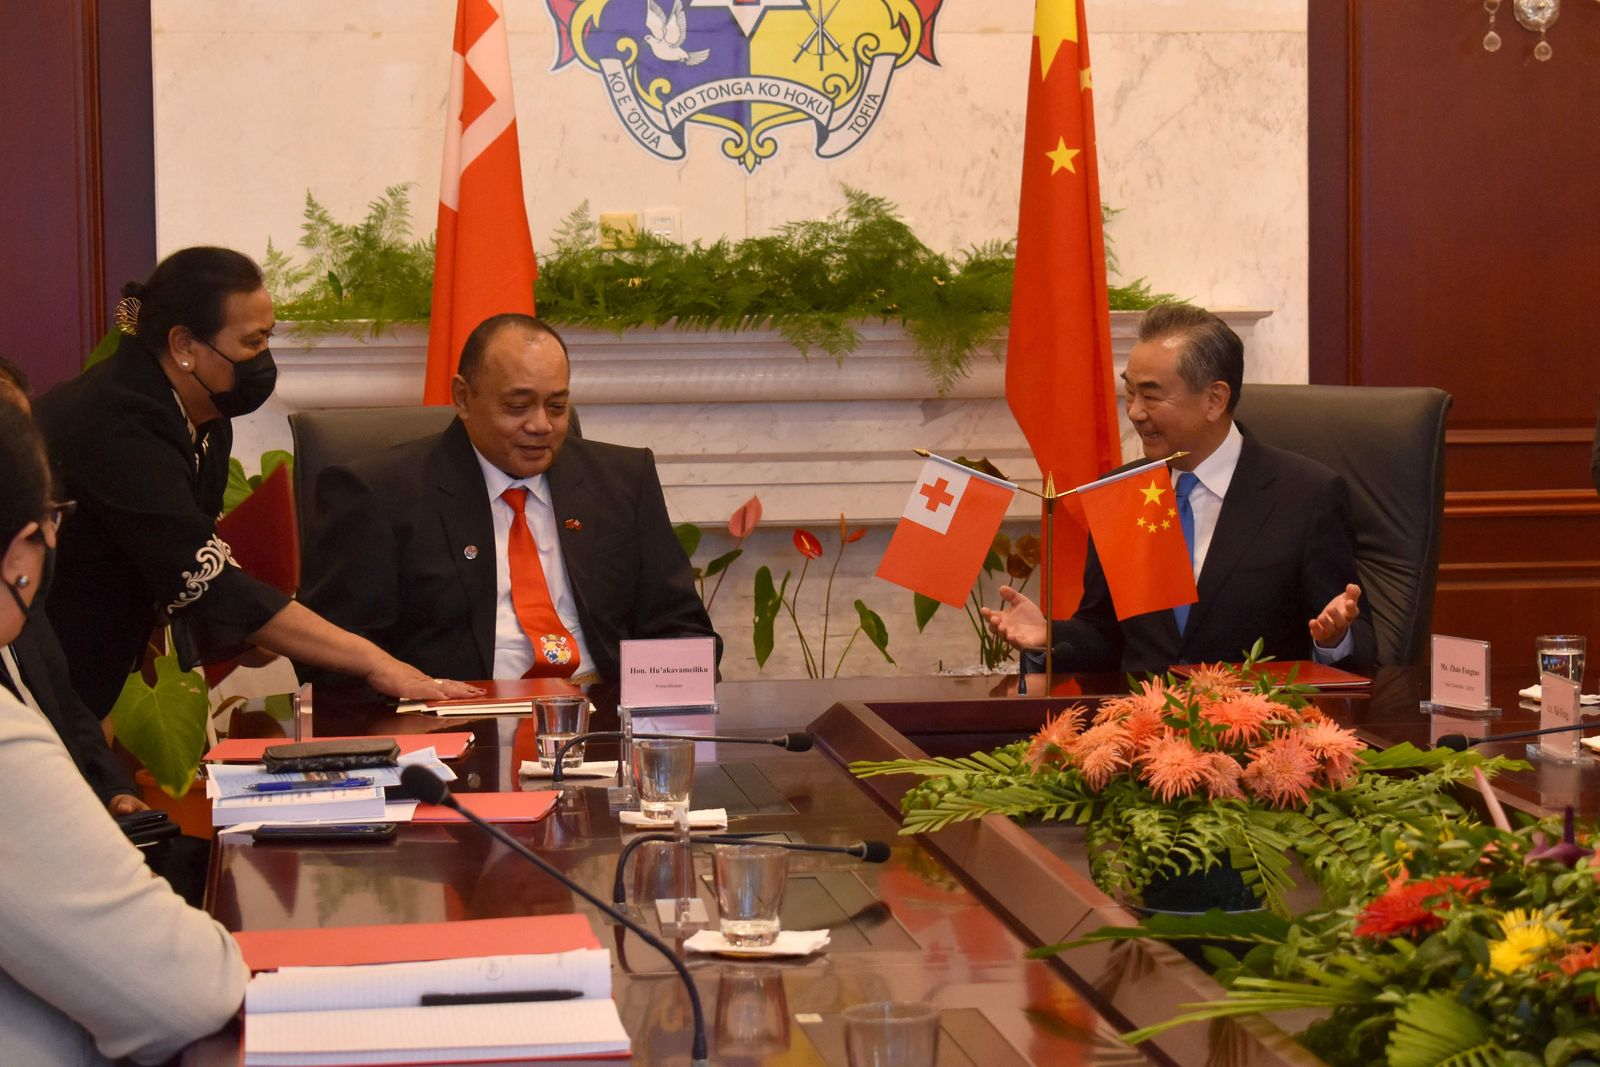 Tongan Prime Minister Hu�akavameiliku talks with visiting Chinese Foreign Minister Wang Yi (R) during a meeting at the Prime Minister�s Office in Nuku�alofa on May 31, 2022. (Photo by Linny Folau / MatangiTonga / AFP) - AFP